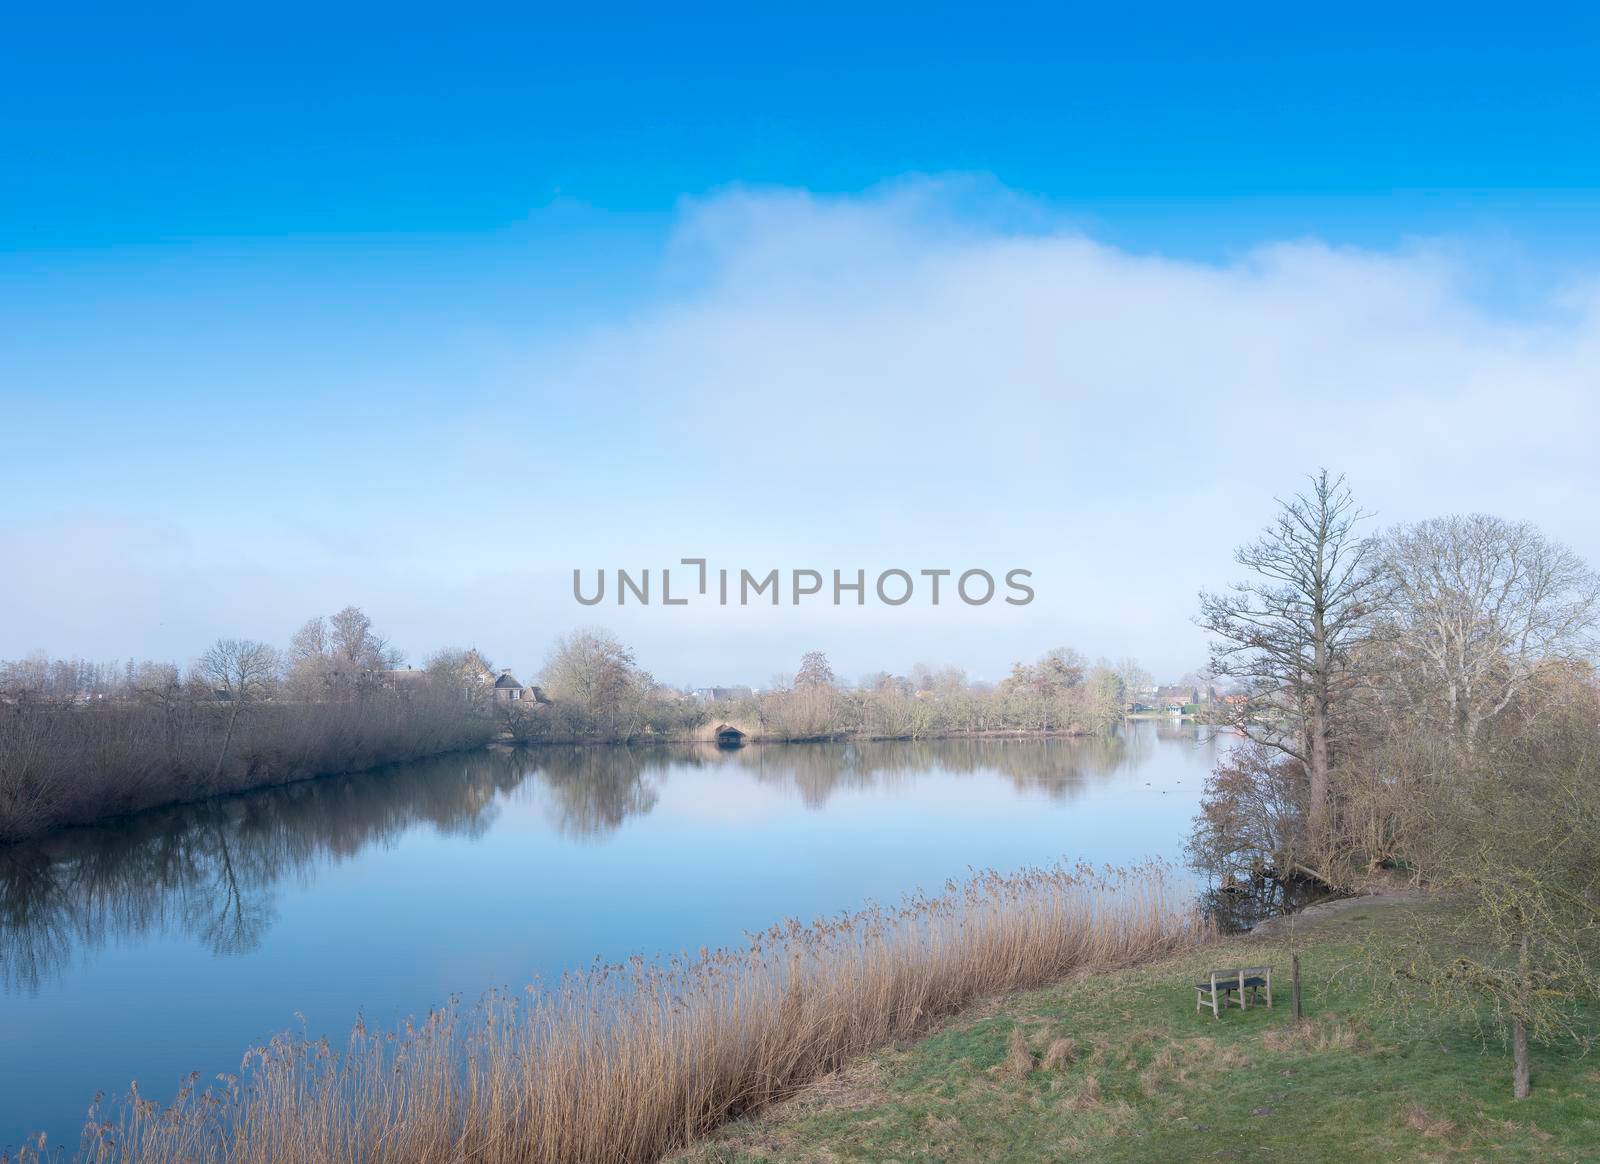 late winter landscape with water in the centre of the netherlands near leerdam under blue sky